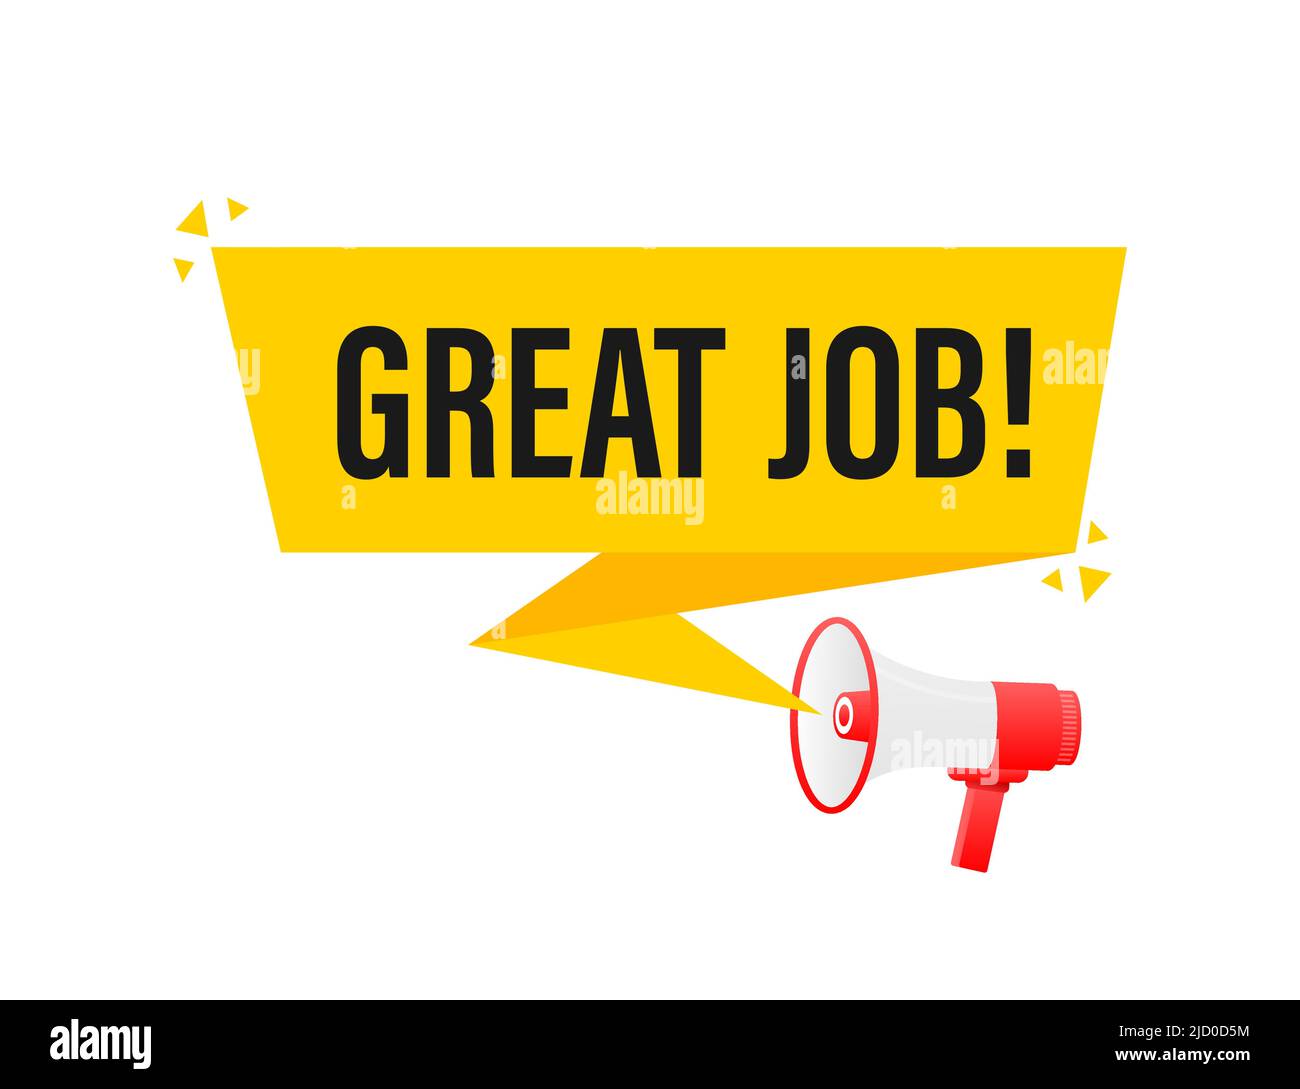 Great job megaphone yellow banner in 3D style on white background. Vector illustration. Stock Vector